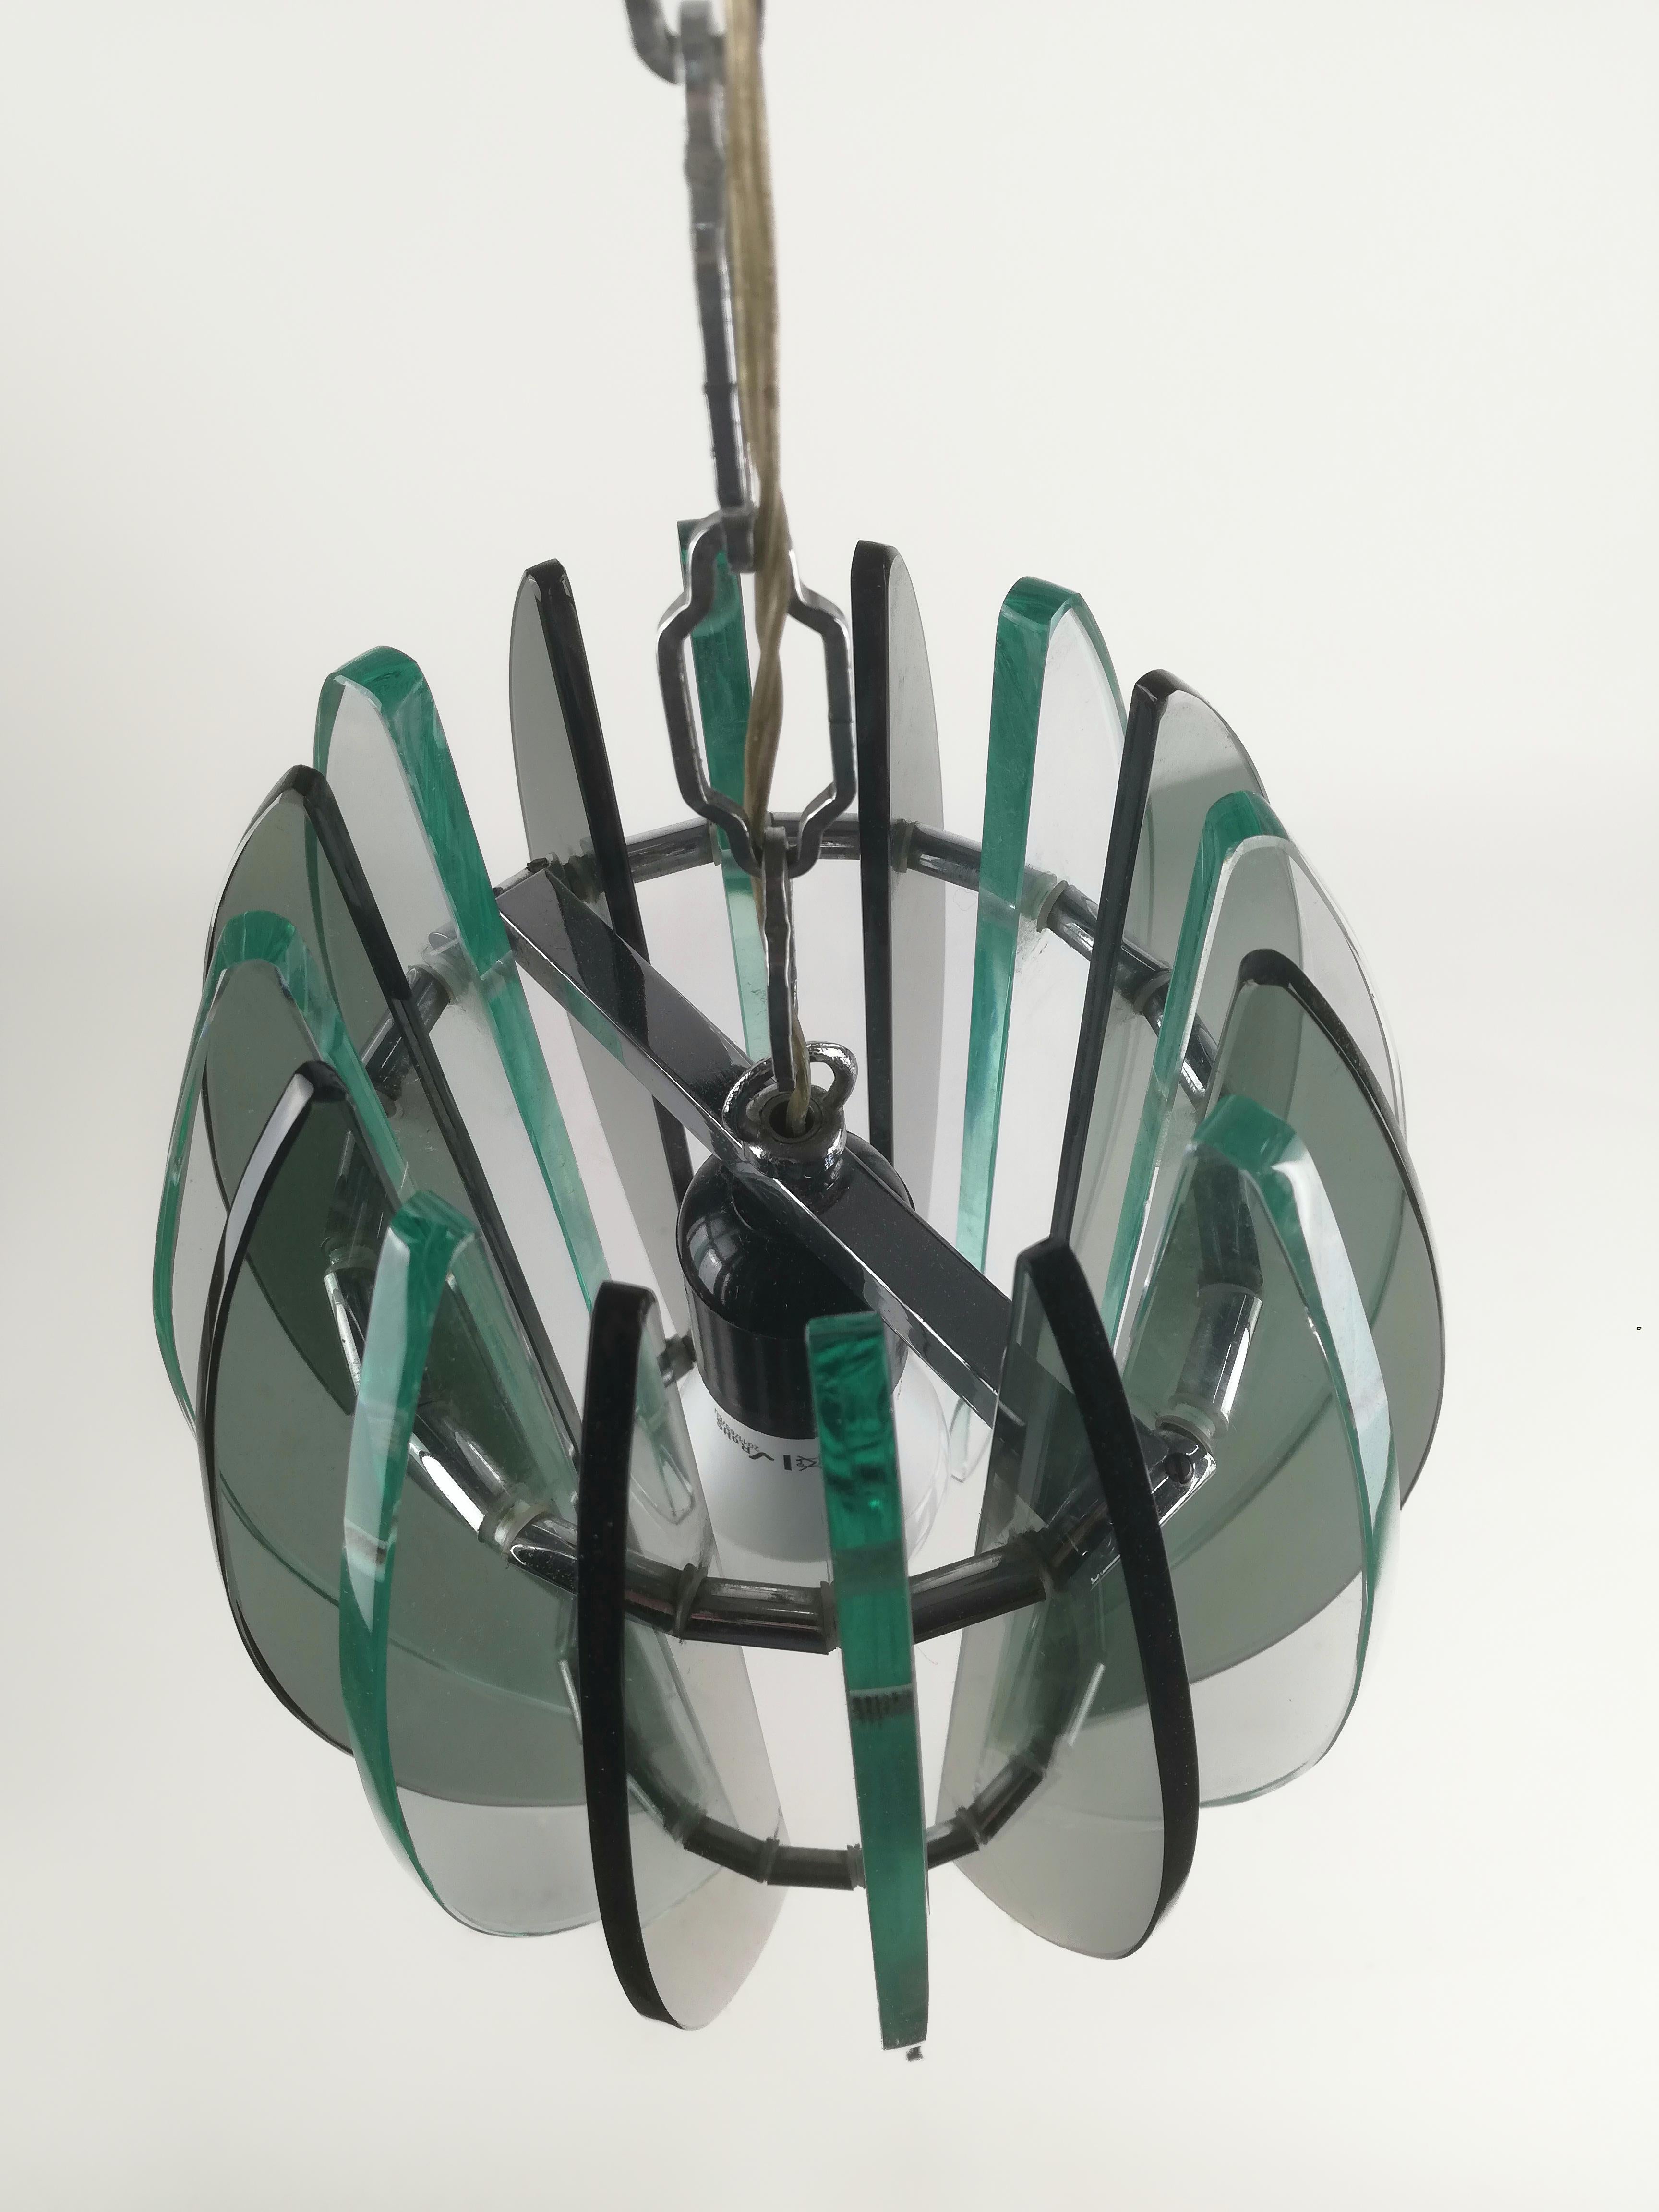 Italian Mid-Century Modern Chandelier by Veca in Fumè and Turquoise Glass For Sale 3